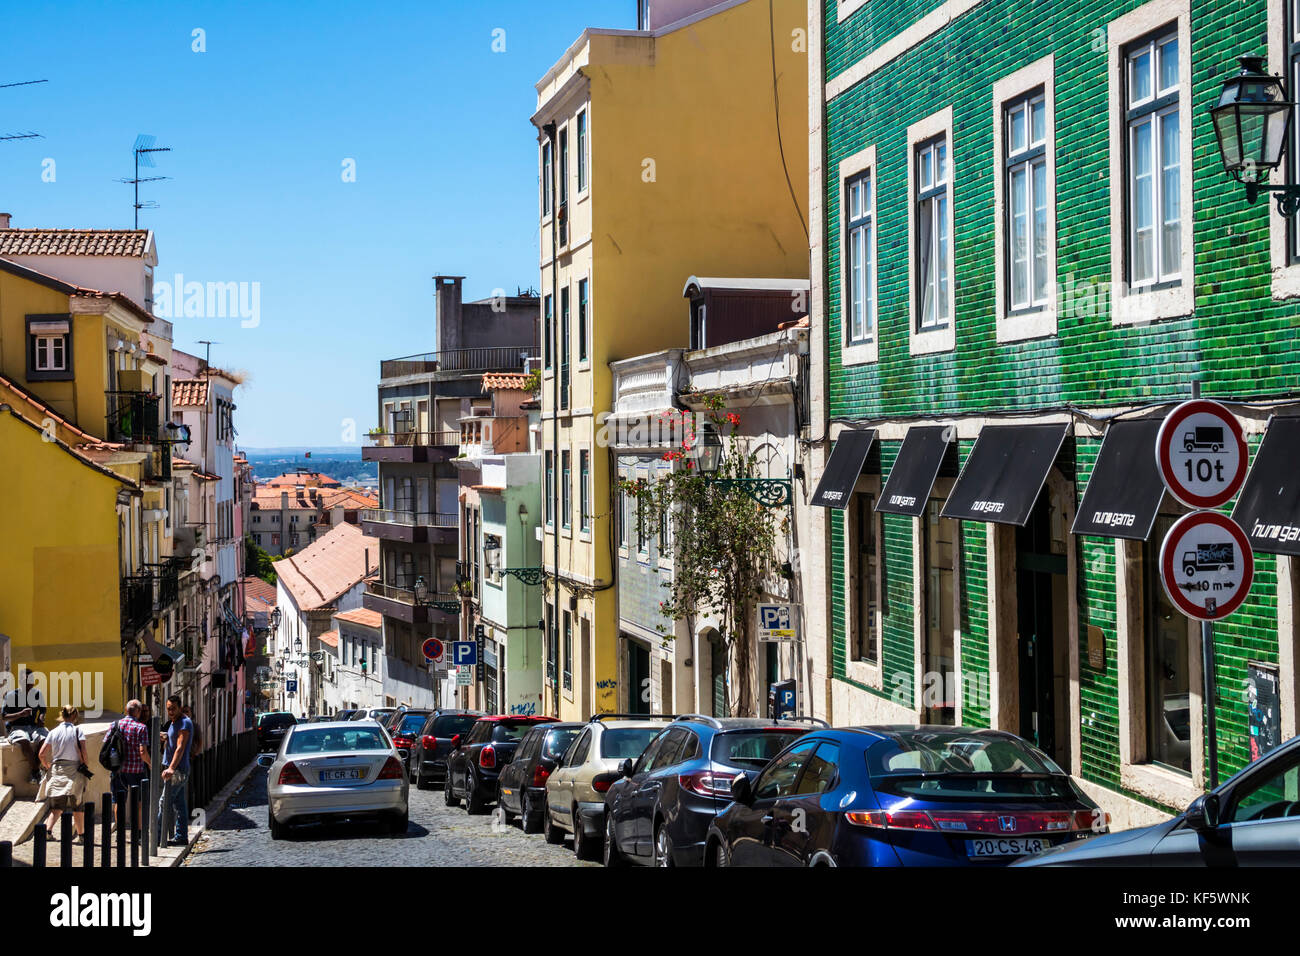 Lisbon Portugal,Bairro Alto,historic district,Principe Real,buildings,descending street,parked cars,residential apartment buildings,azulejos,painted t Stock Photo